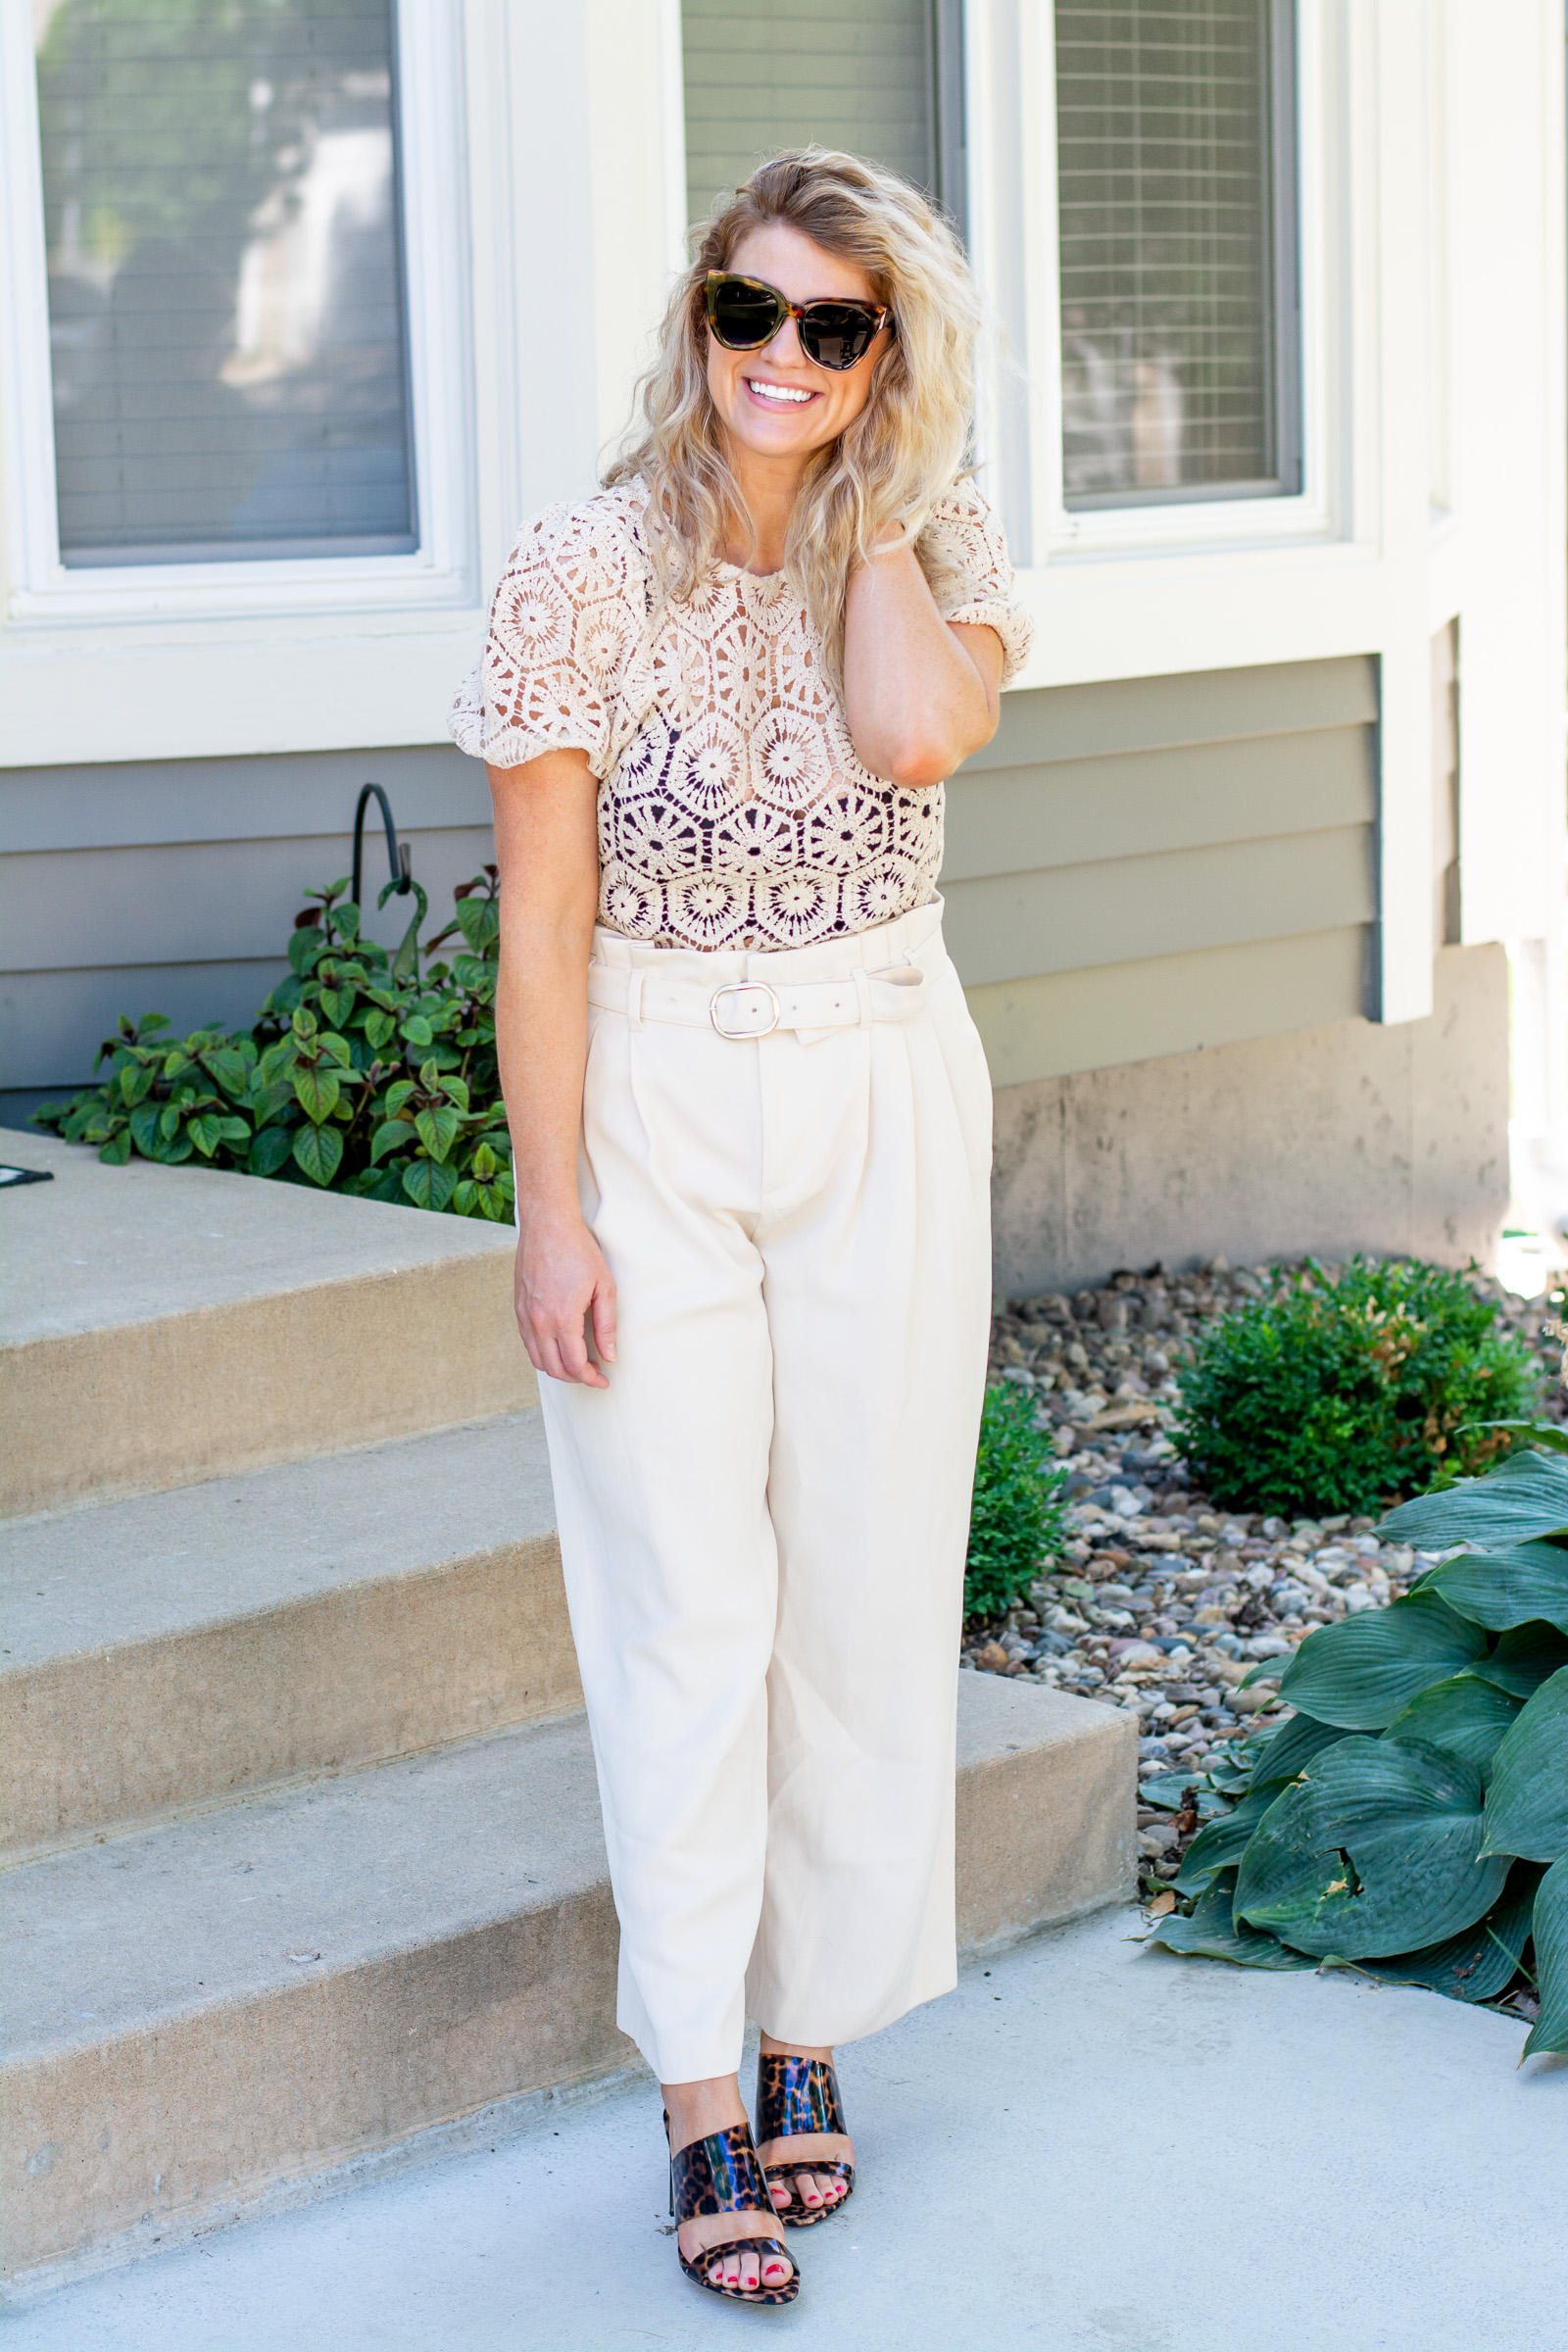 All Beige, Baby: Crochet Top and Zara Trousers.